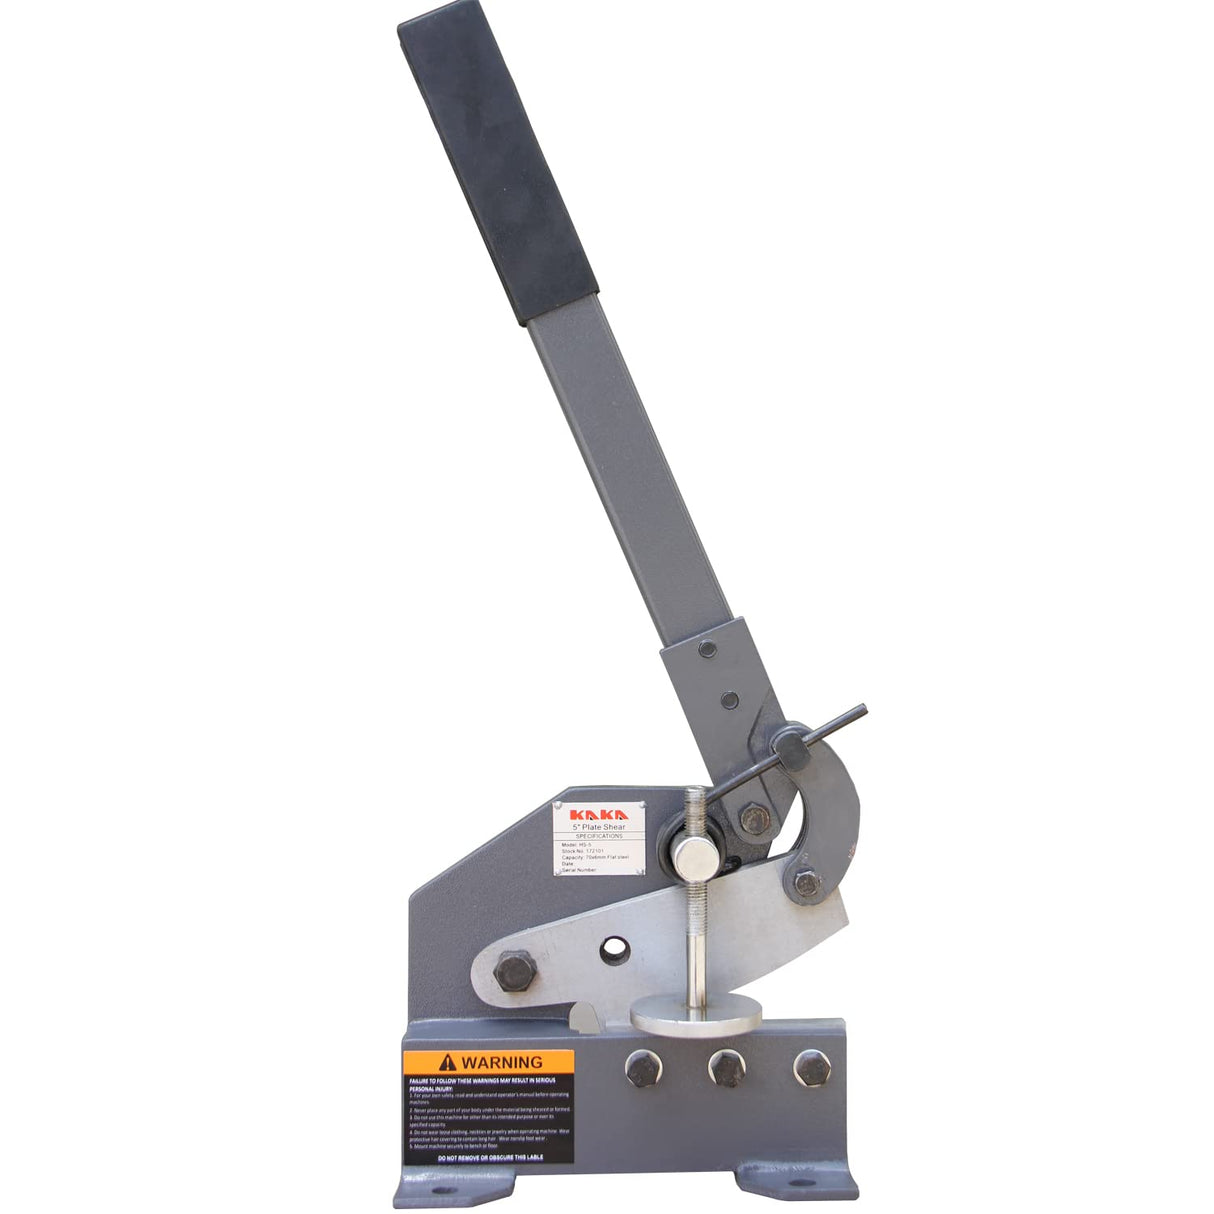 KANG Industrial HS-5 Hand Plate Shear, 127mm Sheet Metal Plate Shear, Mounting Type Metal Shear, For High Precision Cutting Sheets and Bars